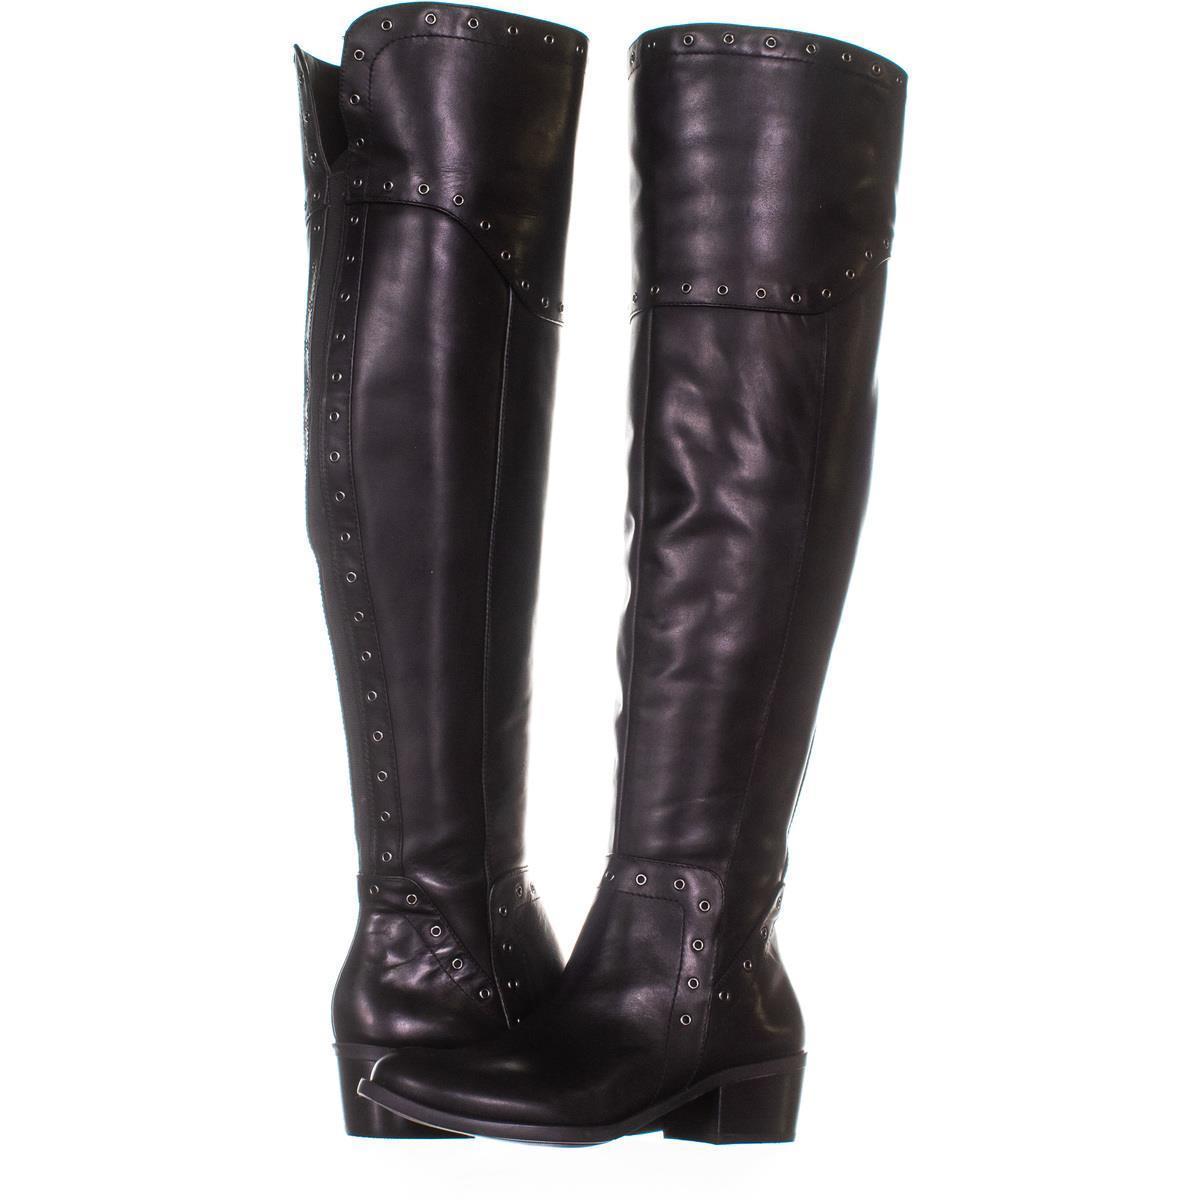 Vince Camuto Bestan Wide Calf Over-The-Knee Boots 570, Black, 7 US - Boots